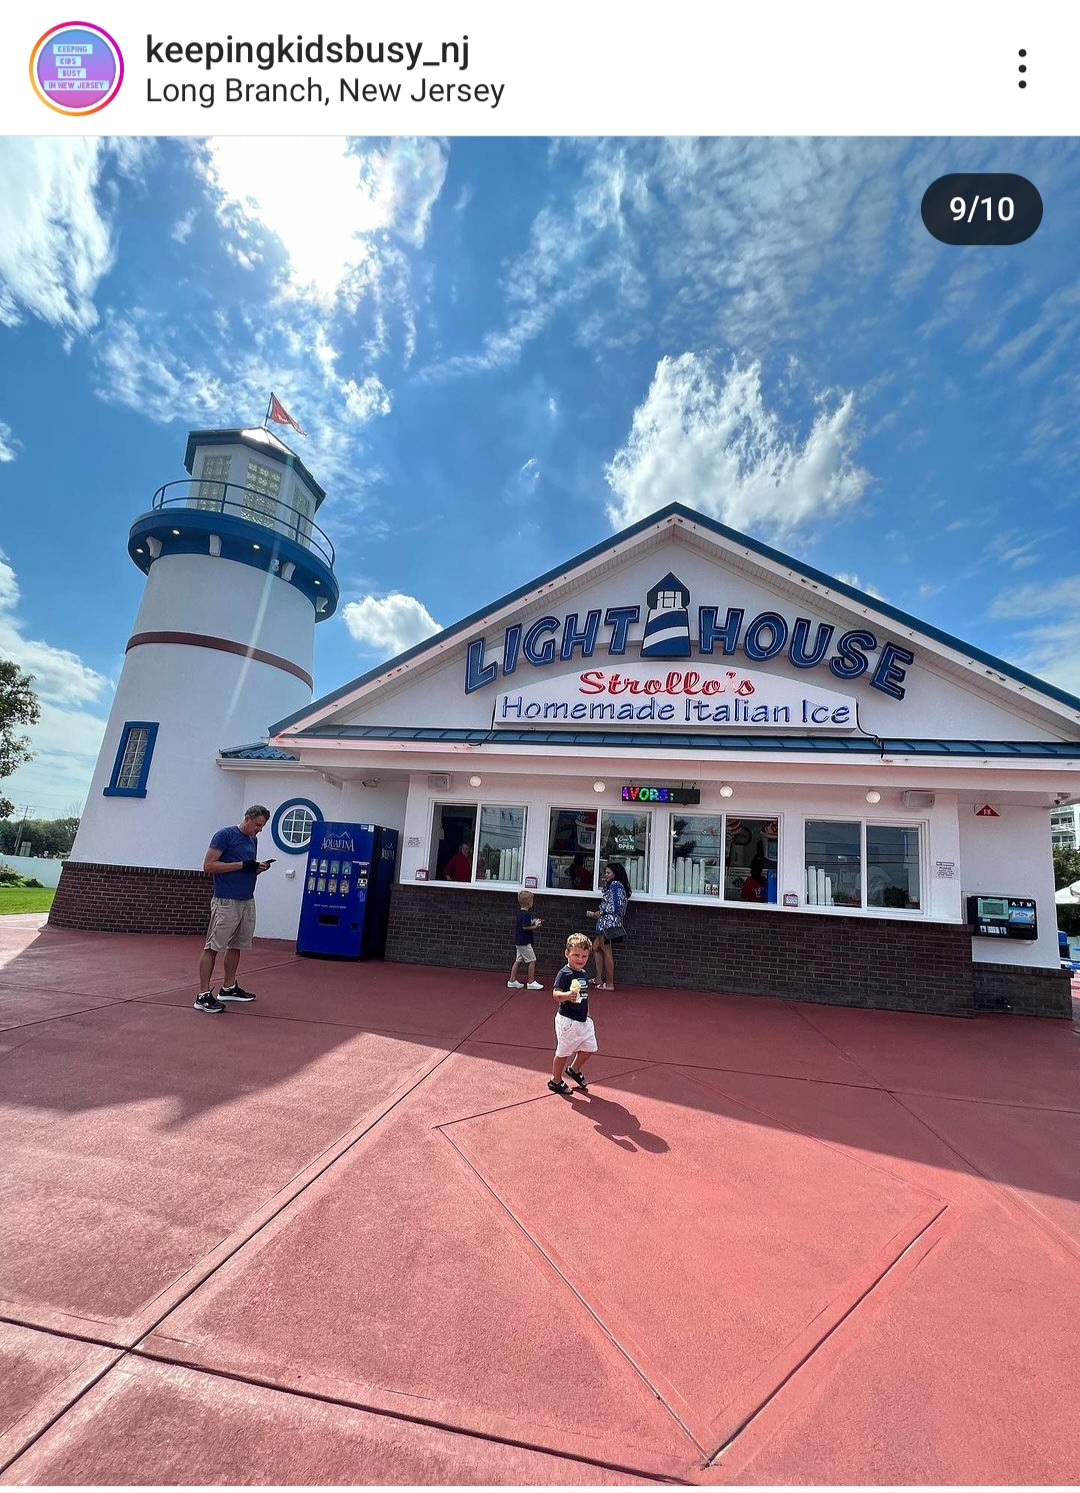 Long Branch NJ Day Trip - Your complete guide to NJ Playgrounds